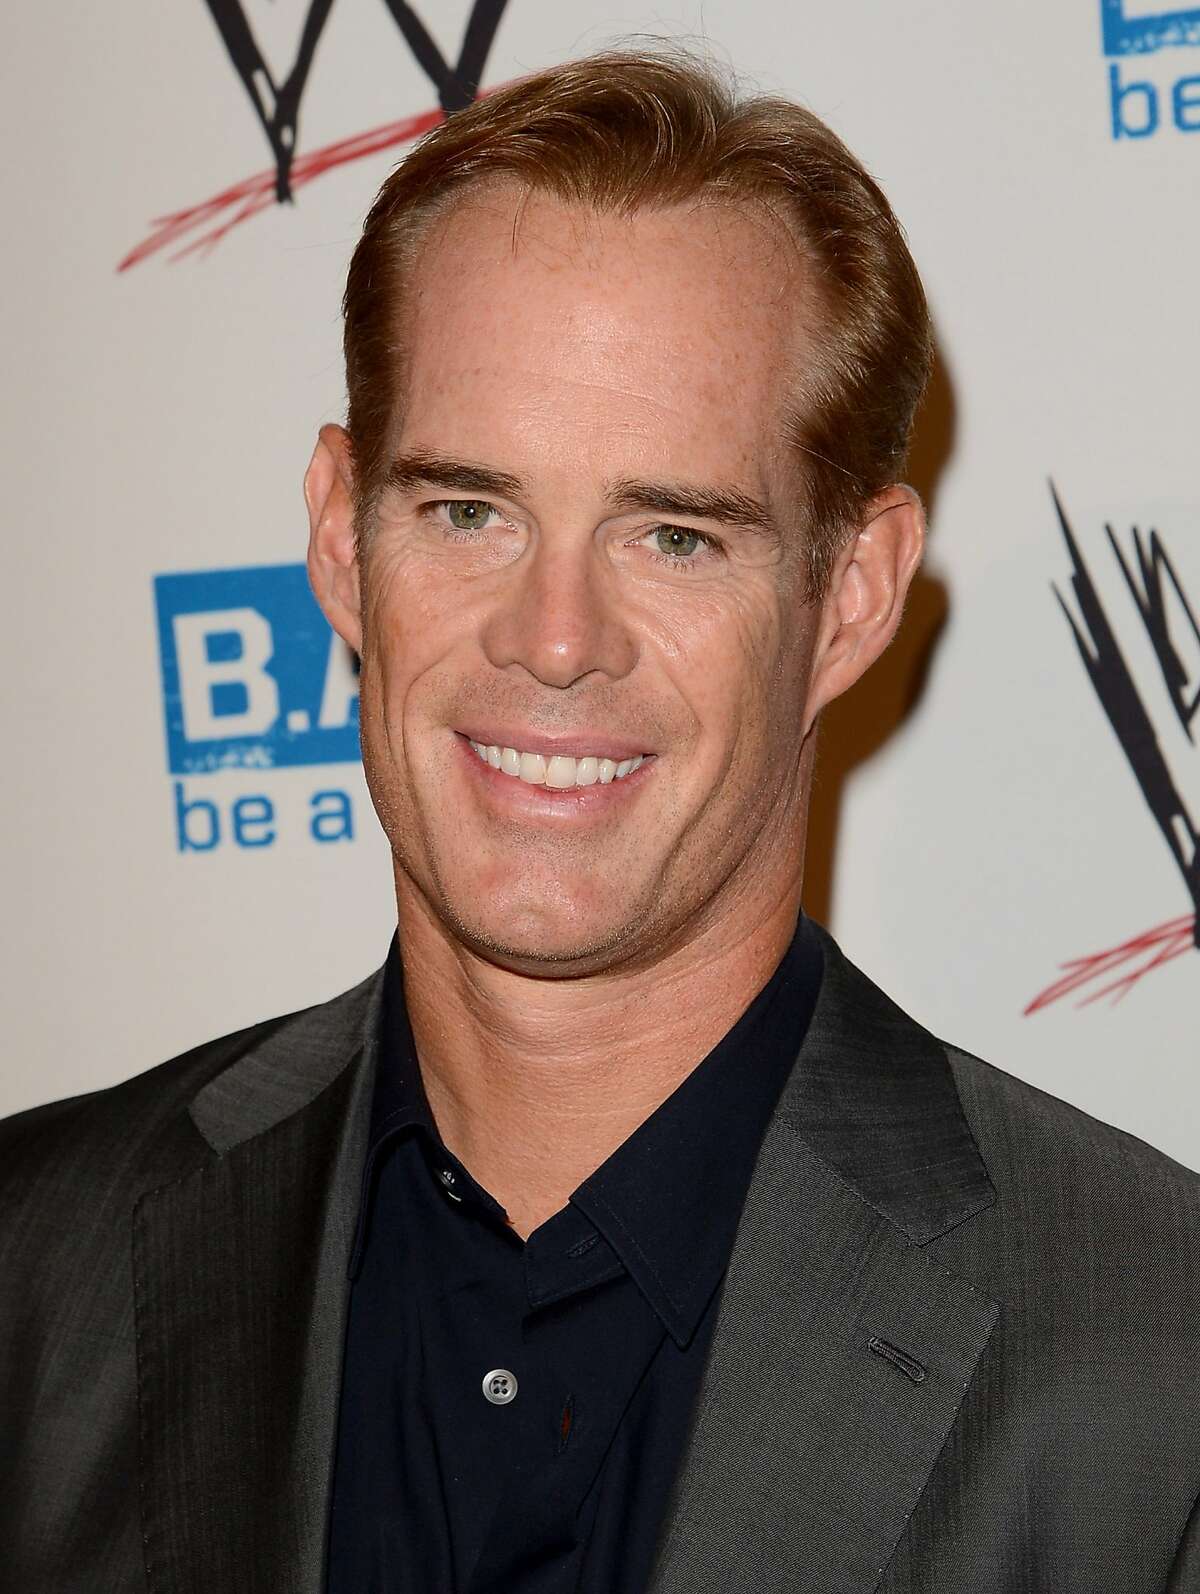 BEVERLY HILLS, CA - AUGUST 16: Sportscaster Joe Buck attends the WWE SummerSlam VIP Kick-Off Party at Beverly Hills Hotel on August 16, 2012 in Beverly Hills, California. (Photo by Jason Merritt/Getty Images For WWE) BEVERLY HILLS, CA - AUGUST 16: Sportscaster Joe Buck attends the WWE SummerSlam VIP Kick-Off Party at Beverly Hills Hotel on August 16, 2012 in Beverly Hills, California. (Photo by Jason Merritt/Getty Images For WWE)